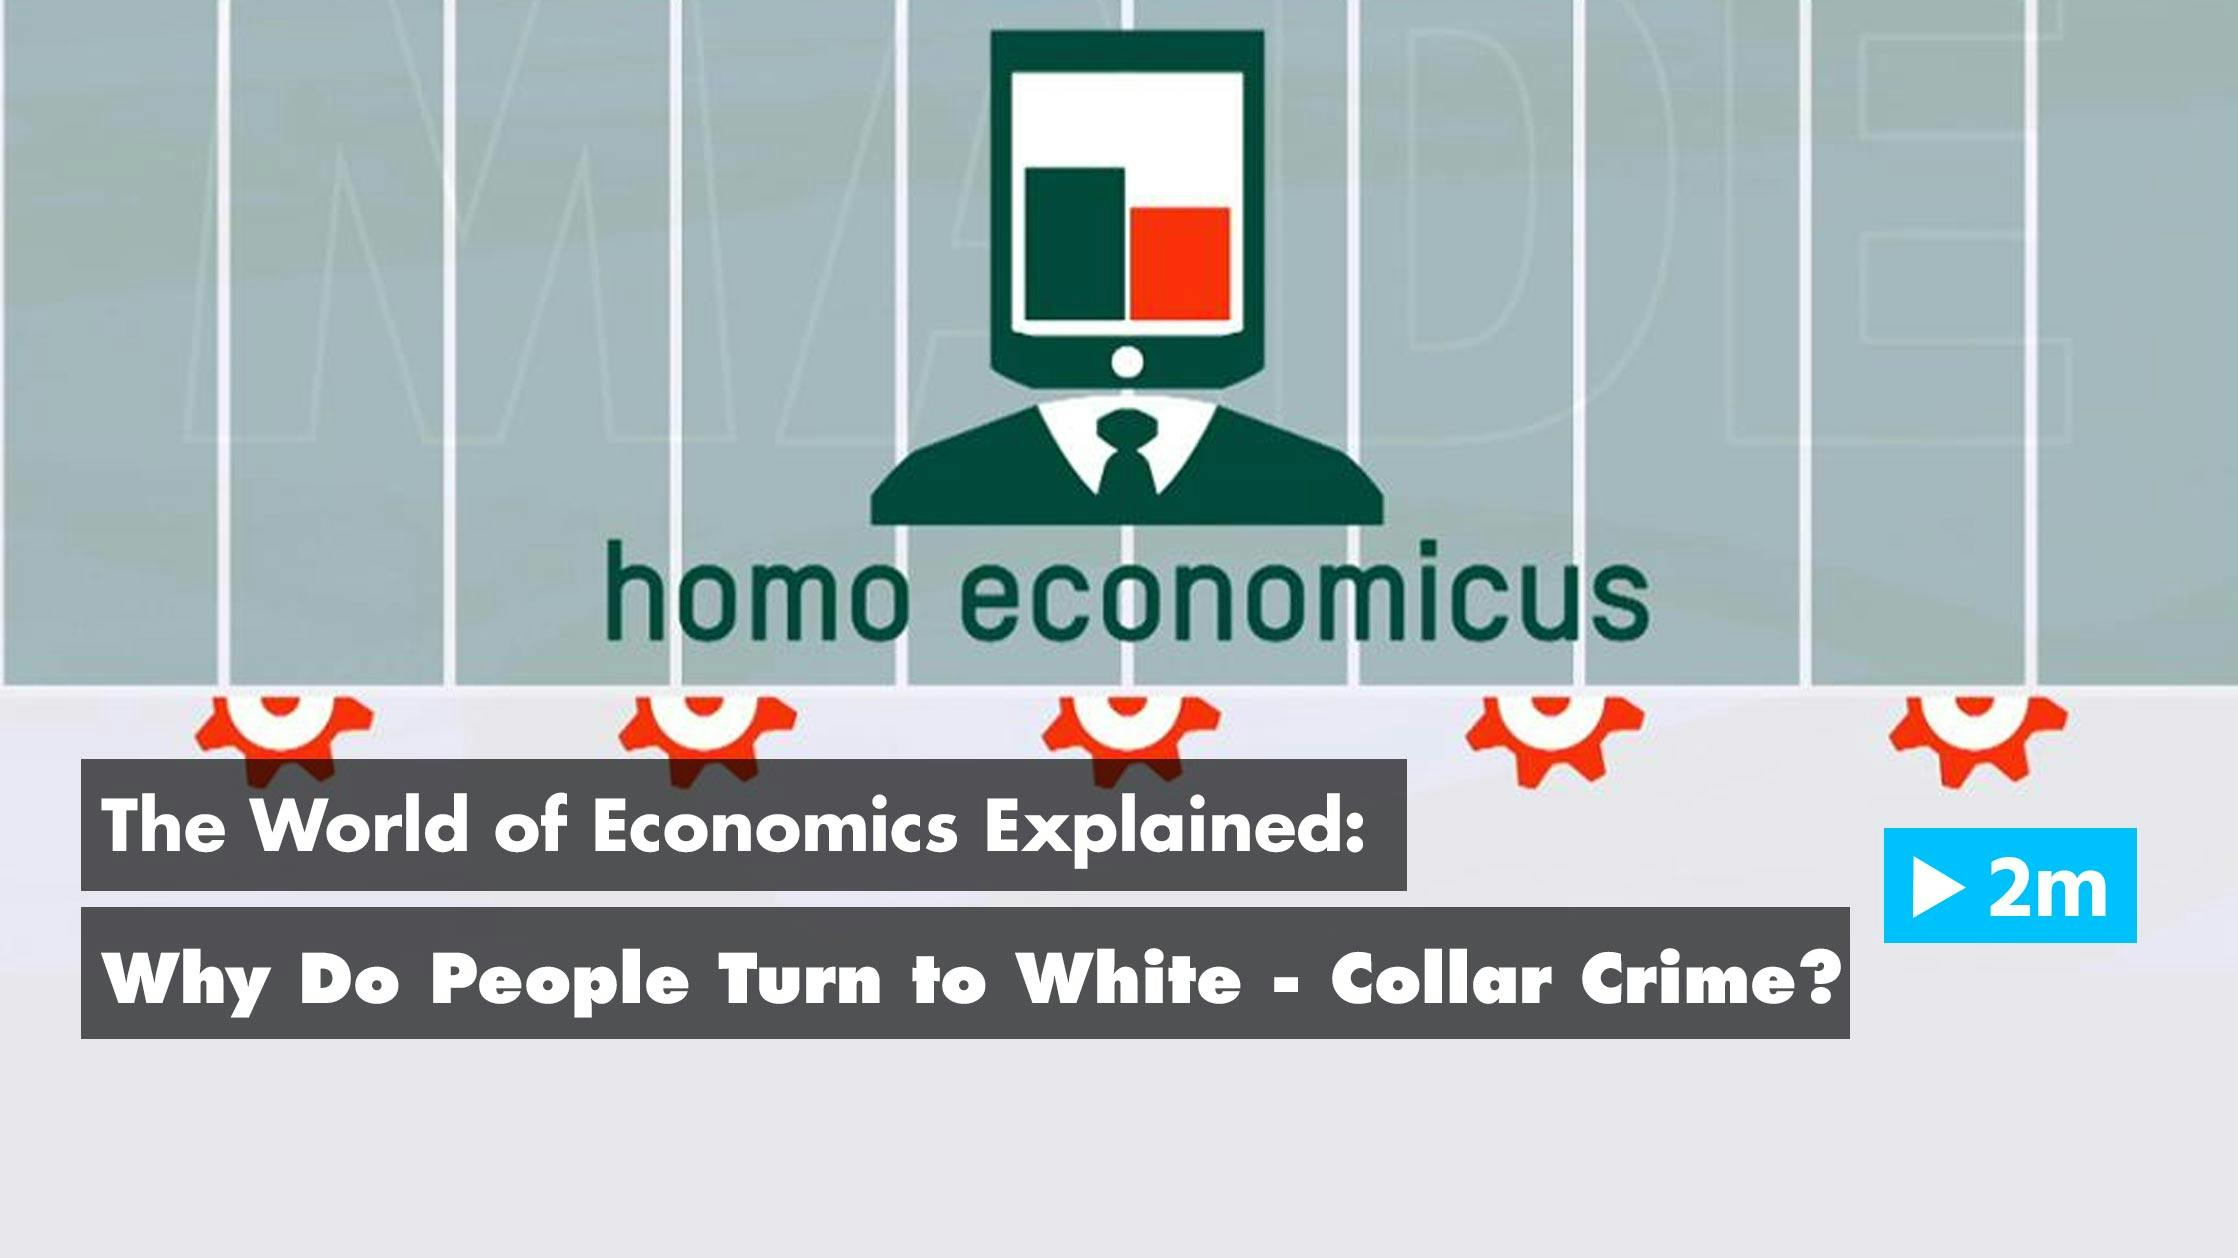 The World of Economics Explained: Why do people turn to white collar crime?